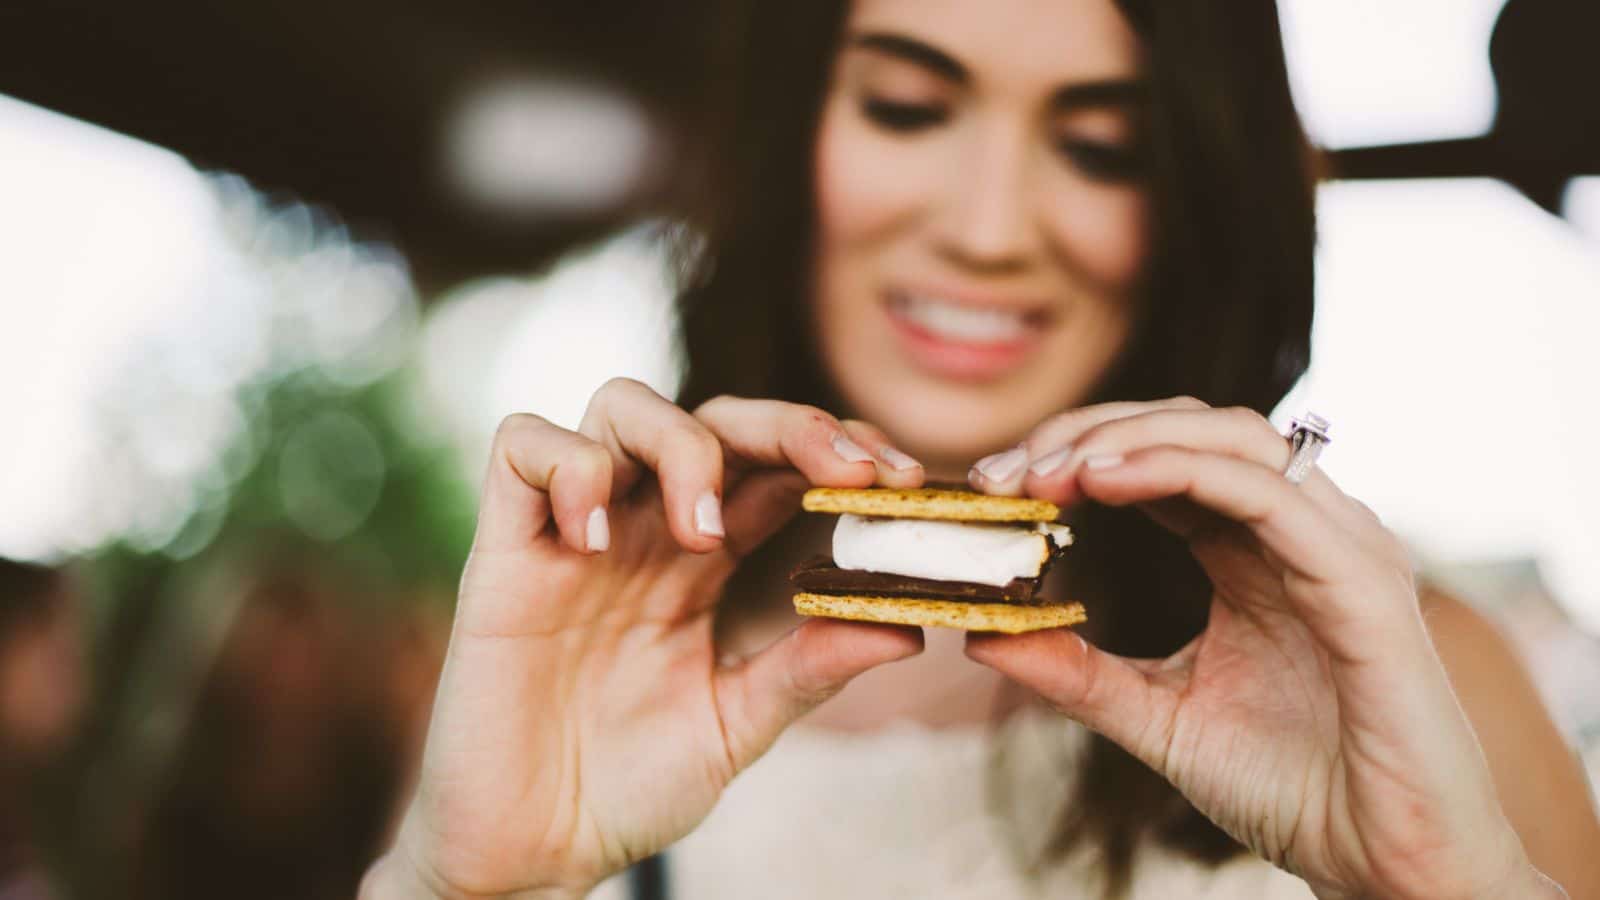 Woman about to eat a smore